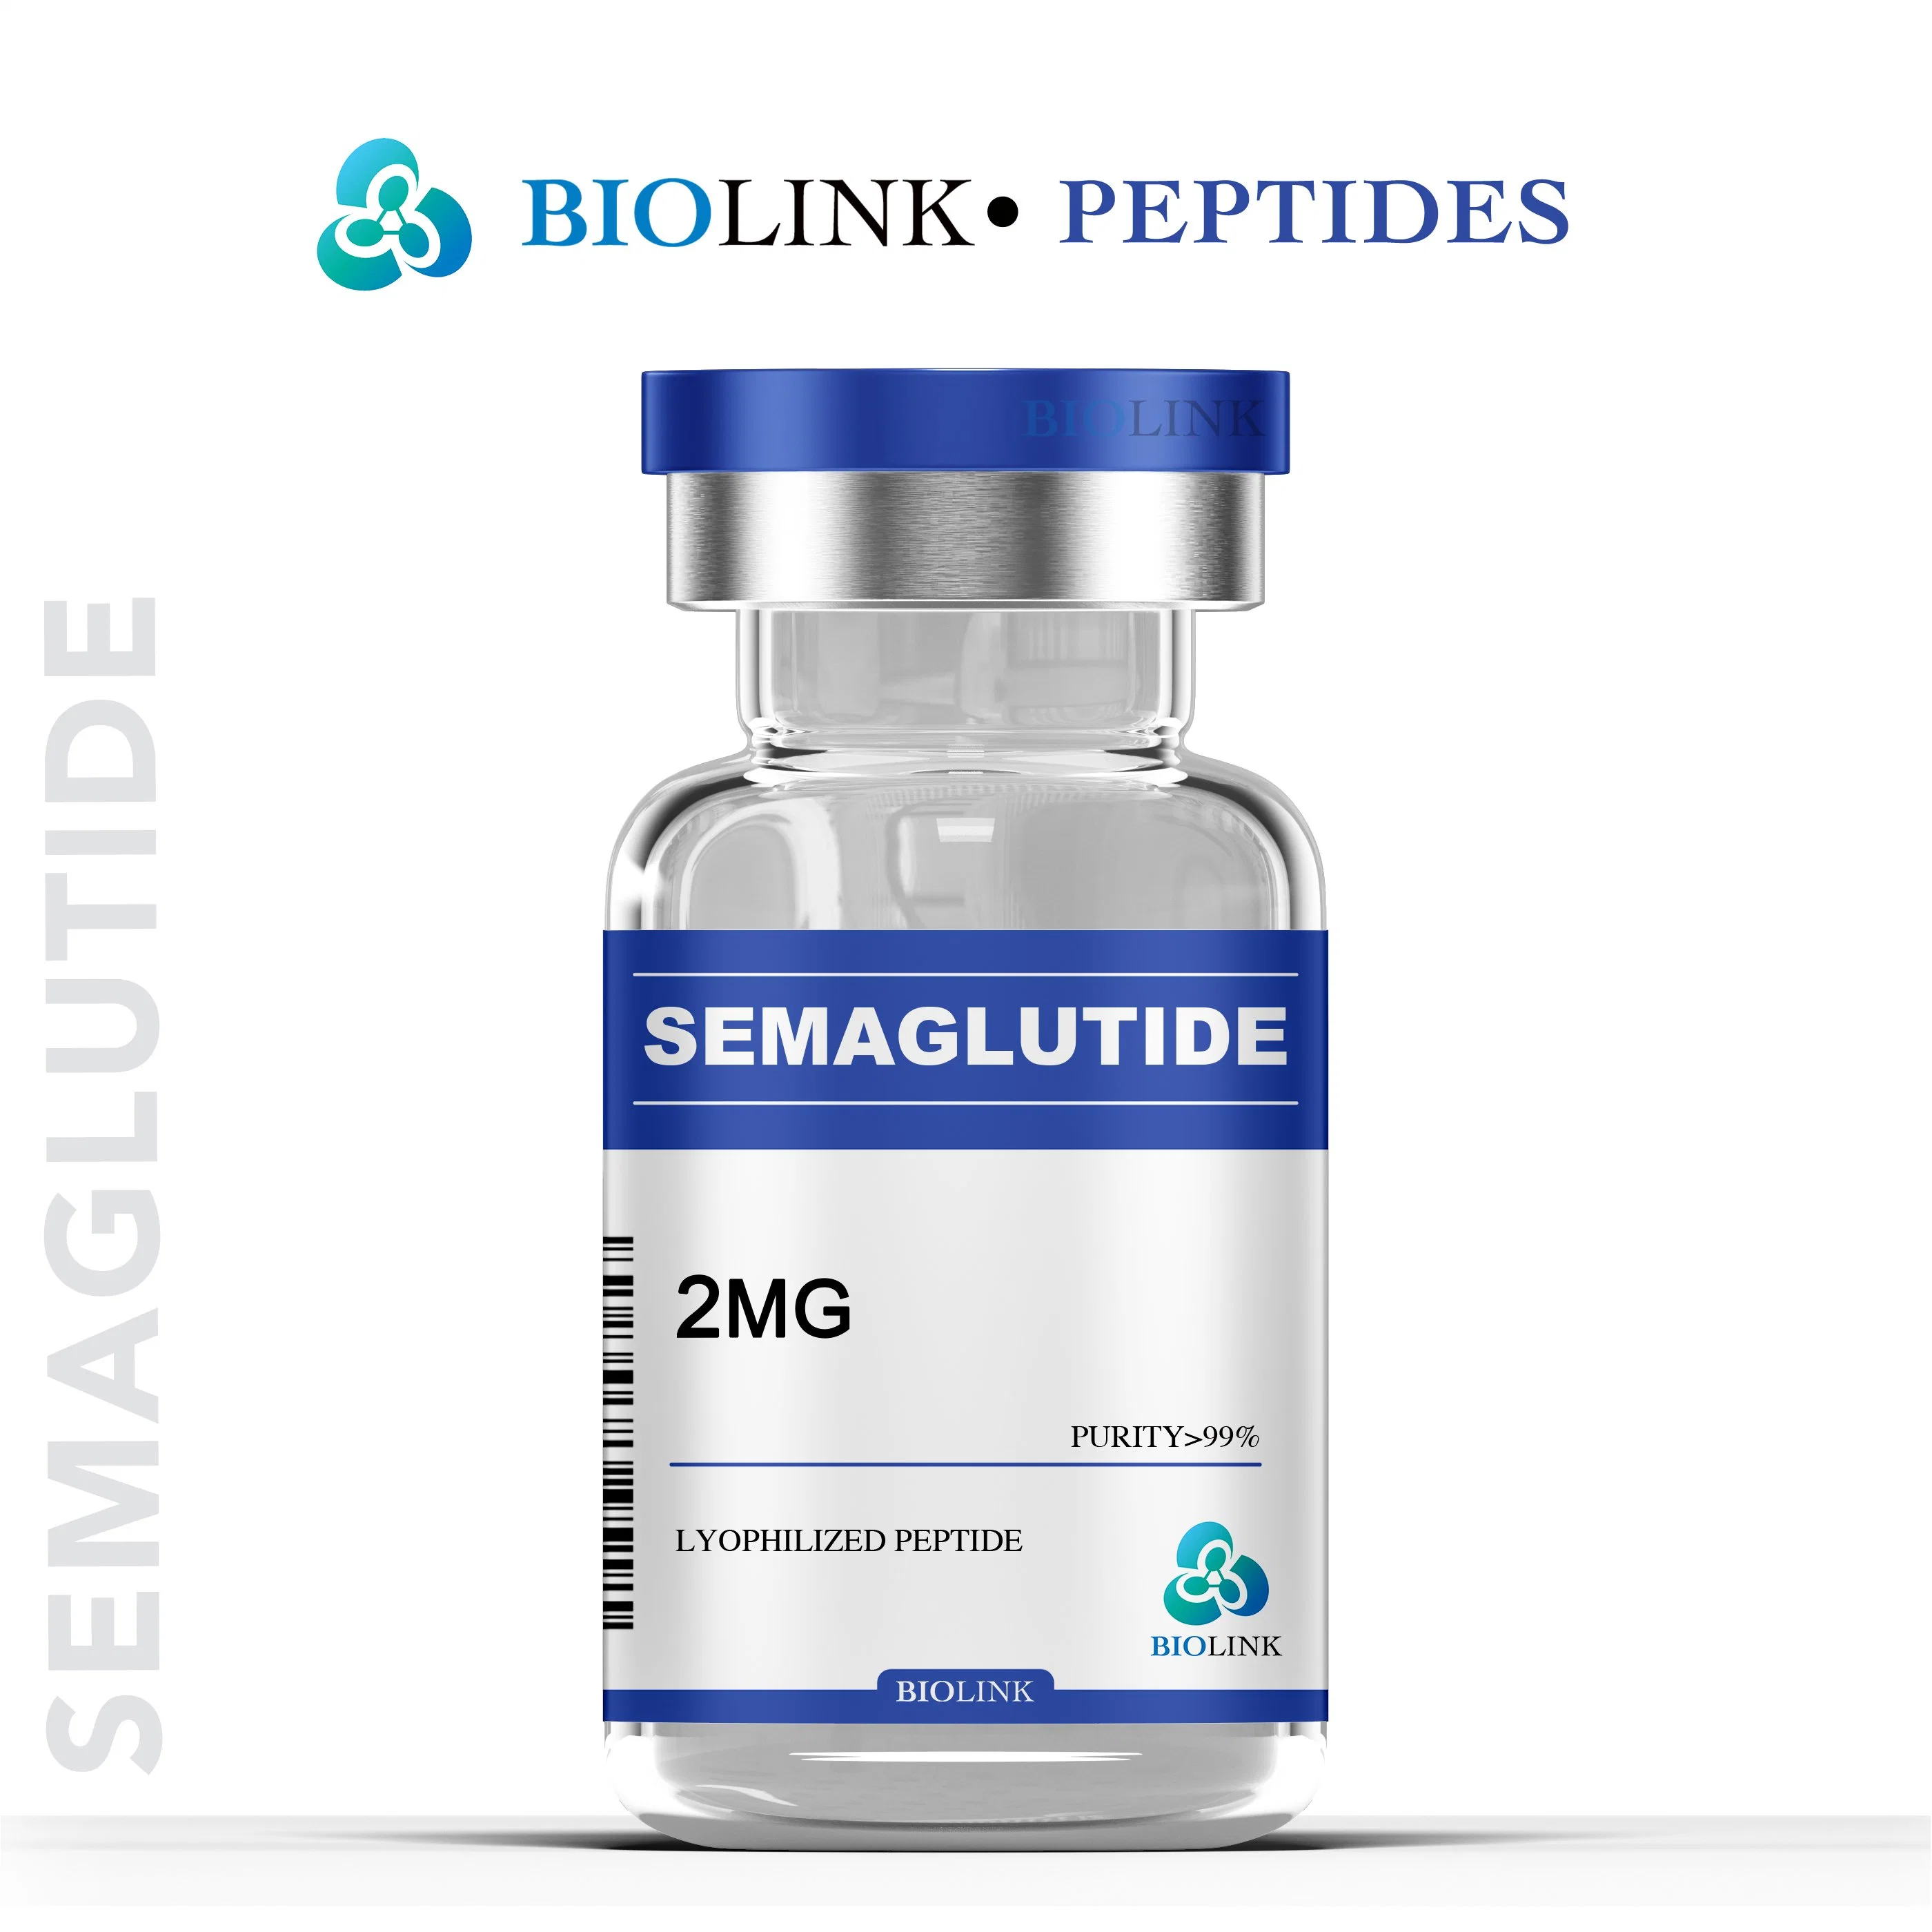 Jano 3rd Lab Testing Support Semagluide 2mg 5mg 10mg UK Warehouse Delivery CAS: 910463-68-2